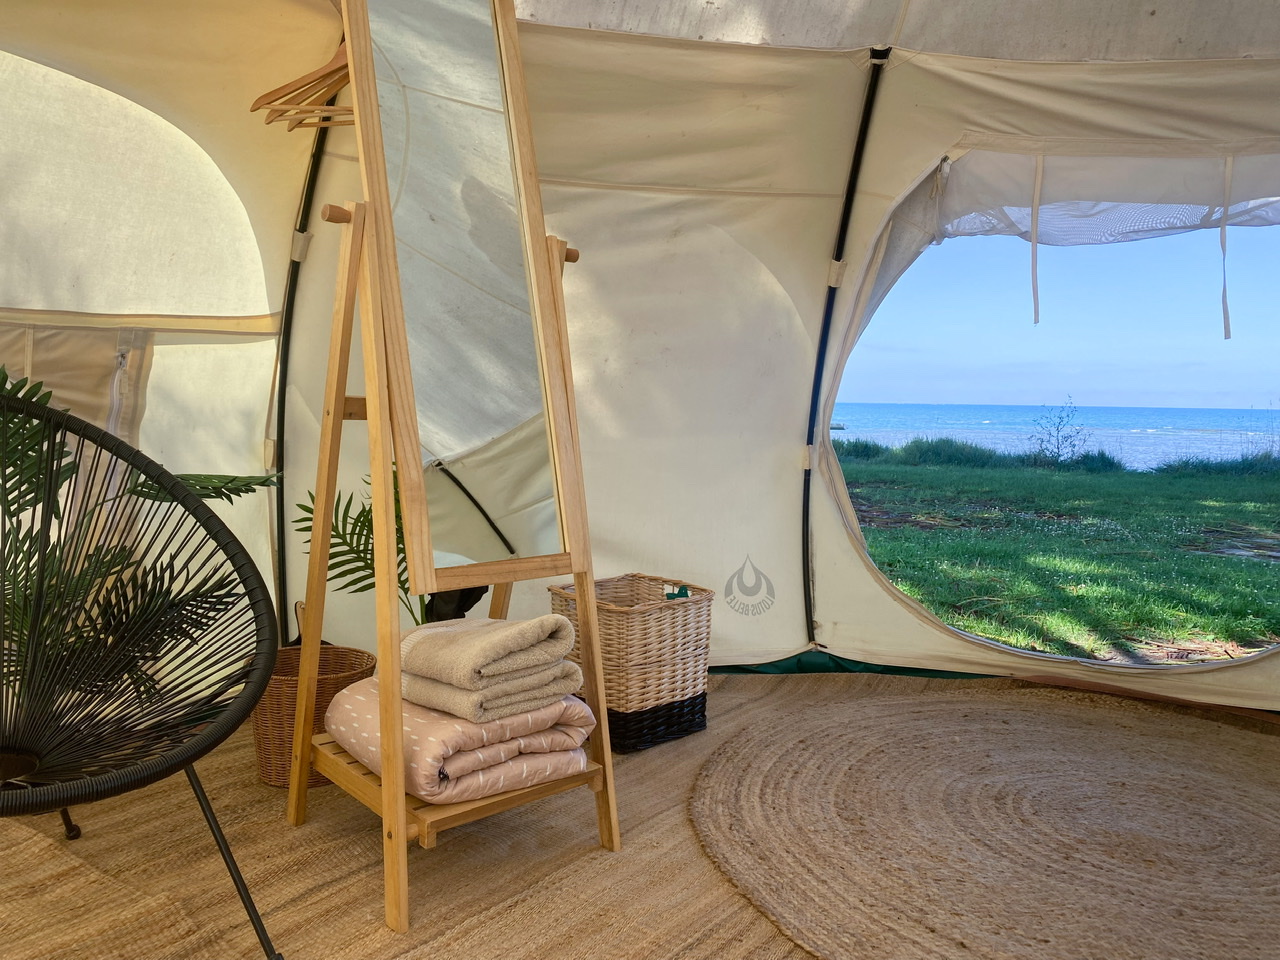 Interior of glamping tent with open door looking out to ocean